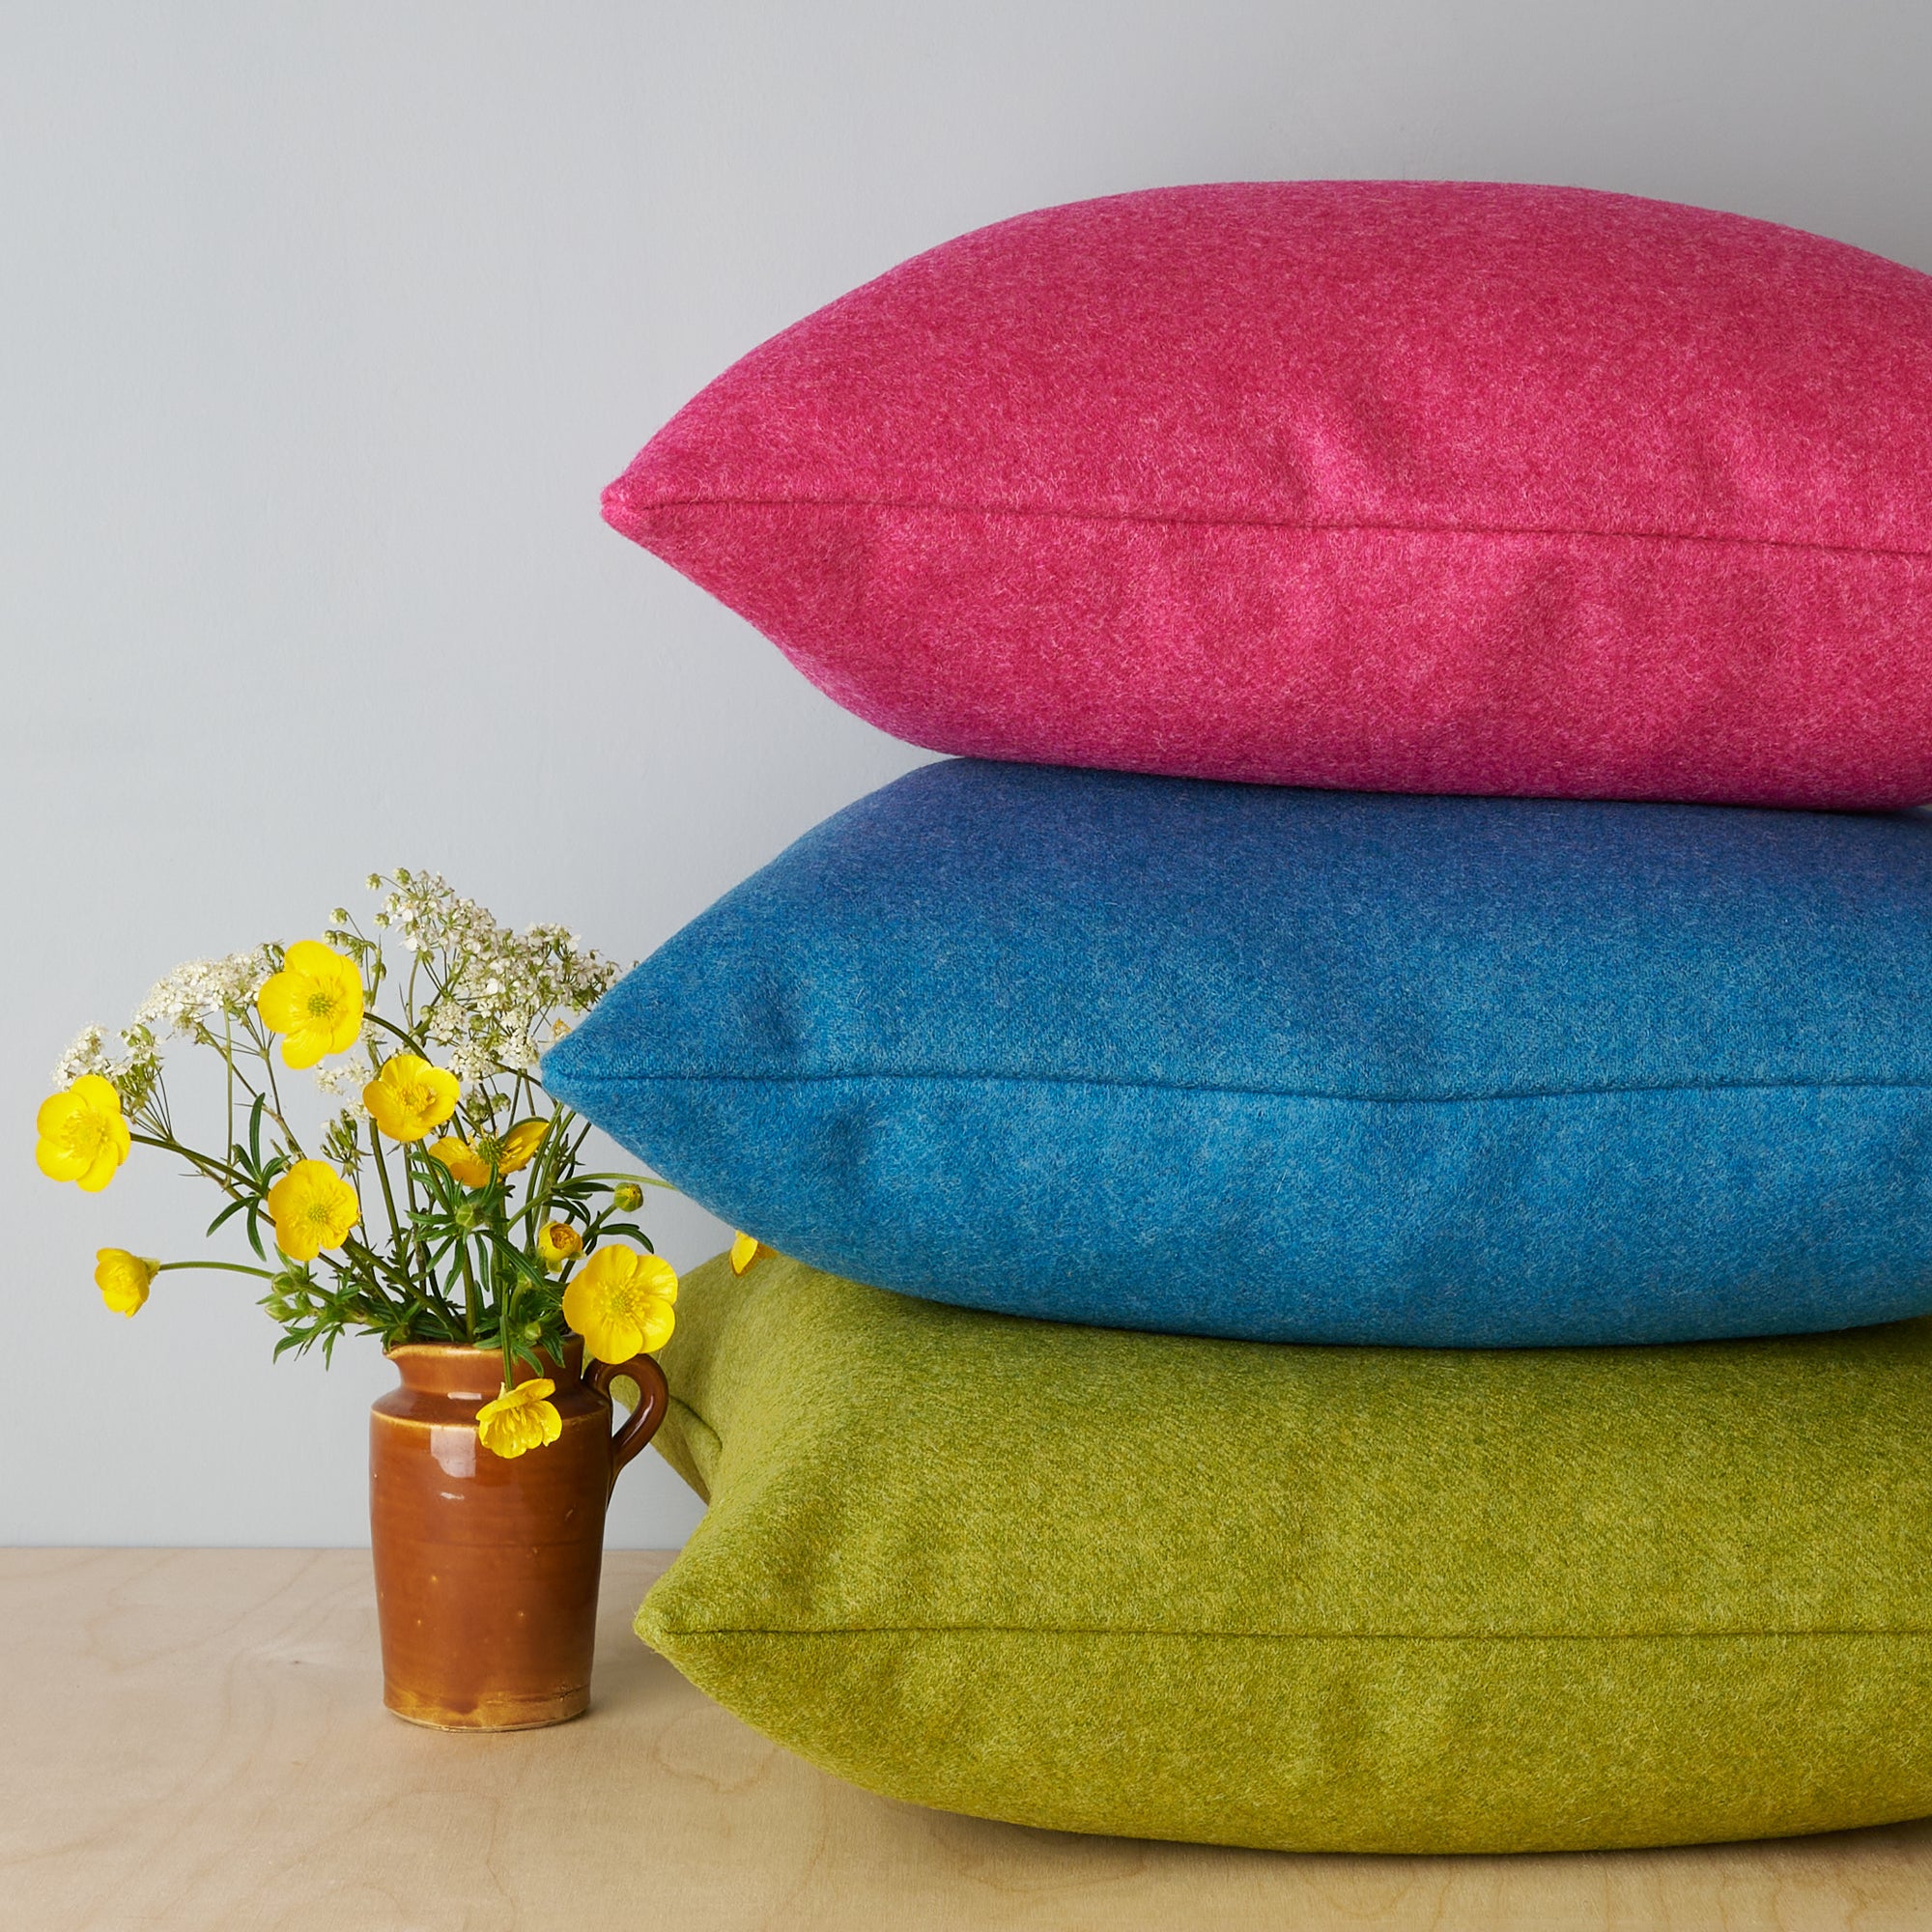 Colourful wool cushions made in UK with Abraham Moon natural & sustainable wool